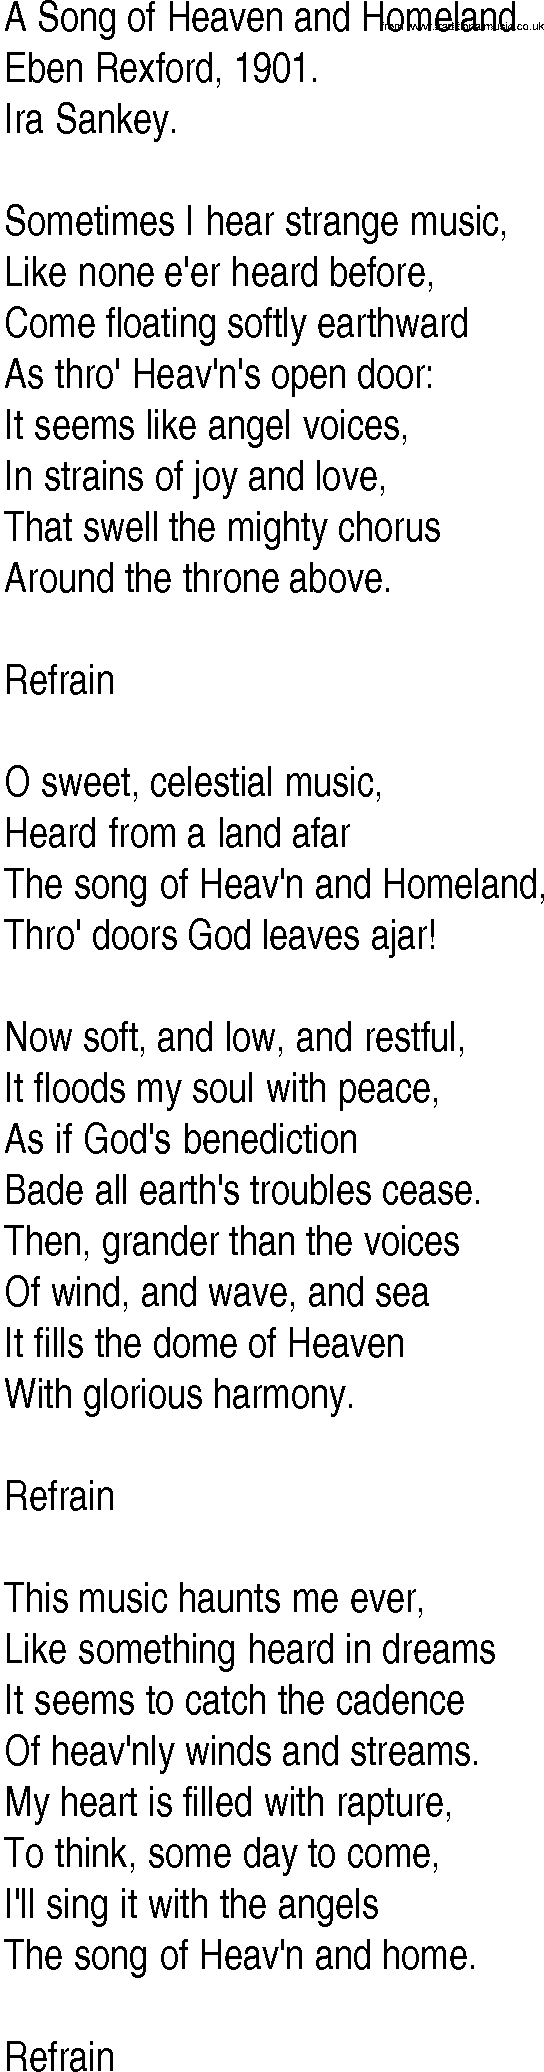 Hymn and Gospel Song: A Song of Heaven and Homeland by Eben Rexford lyrics